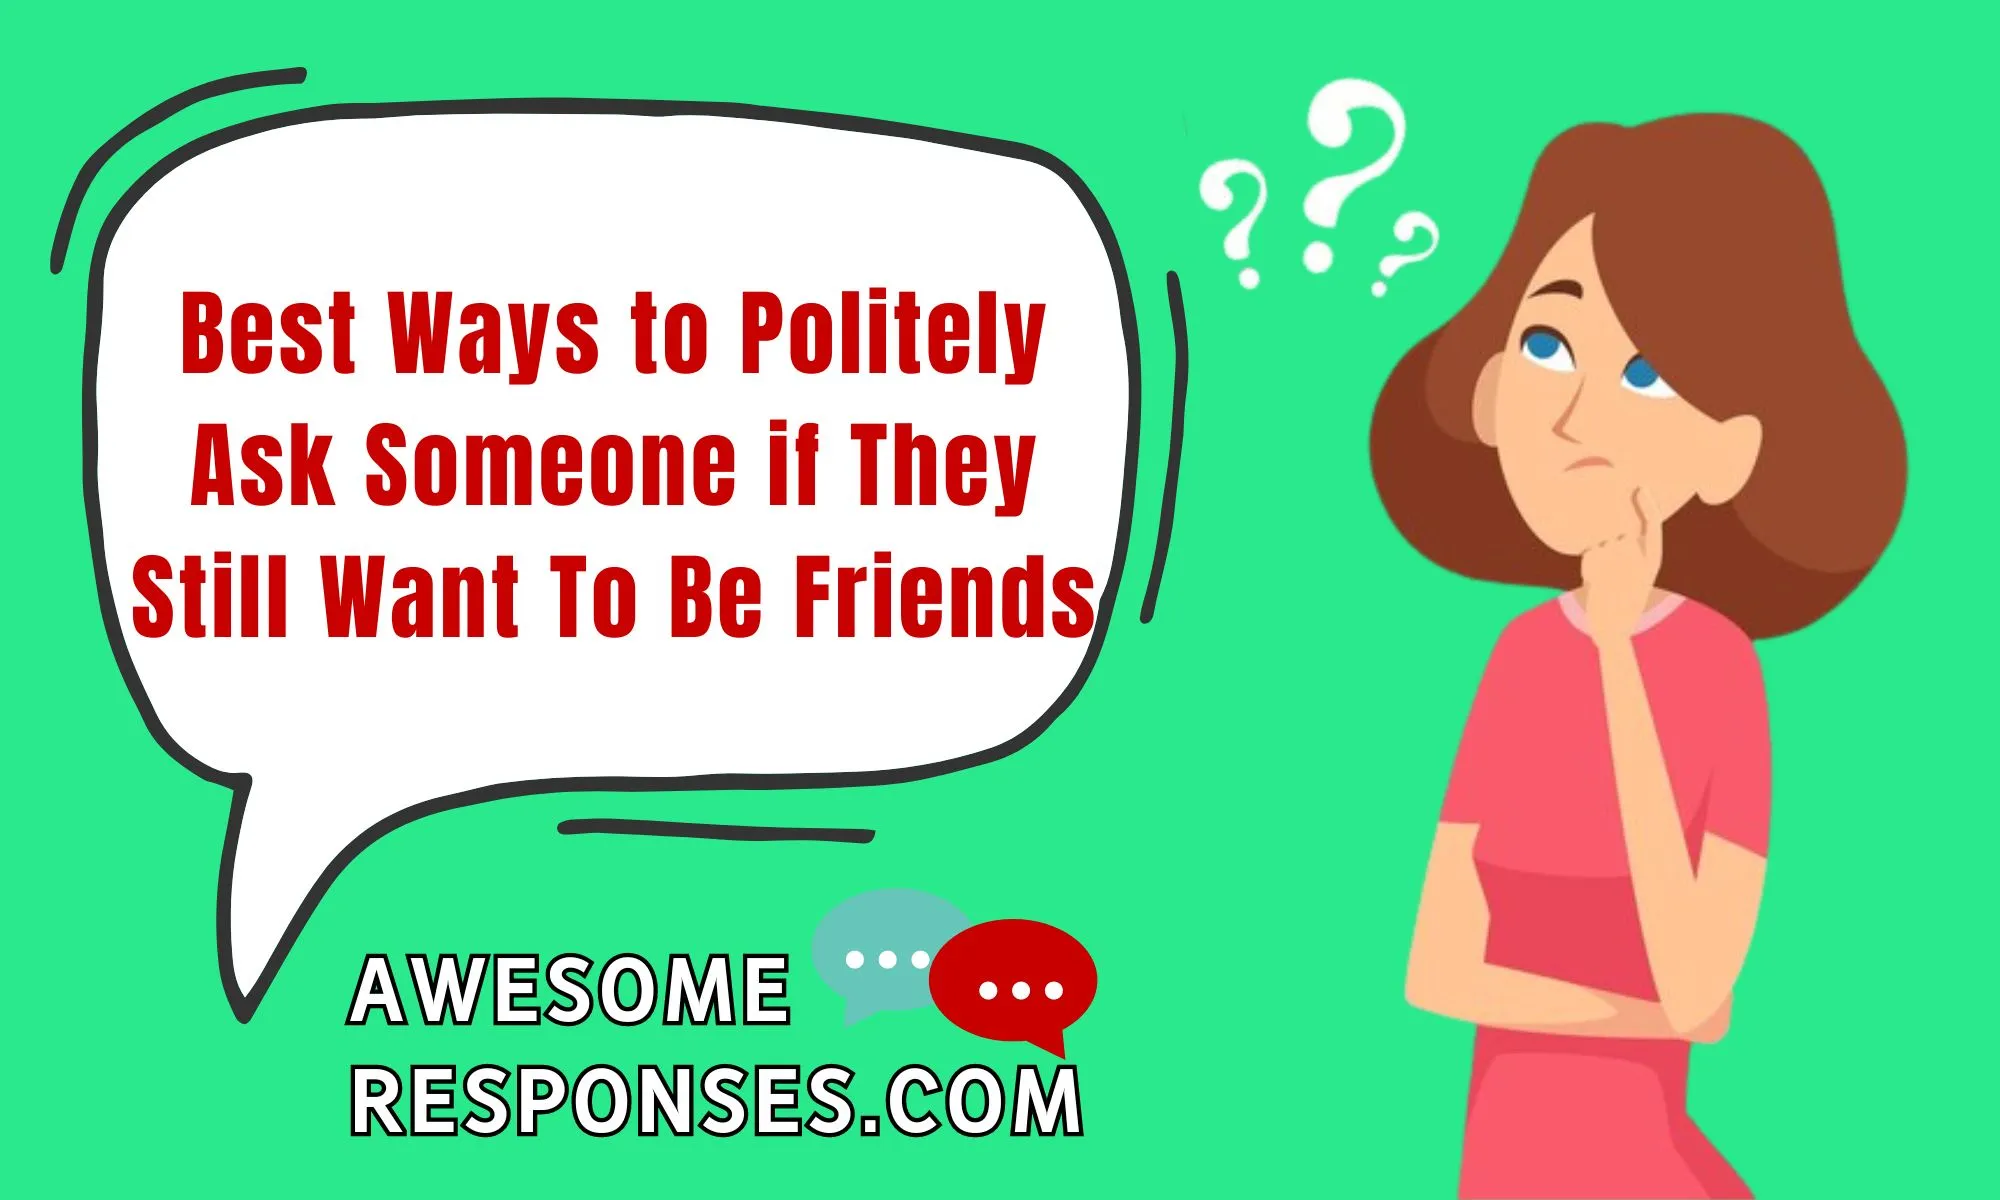 Best Ways to Politely Ask Someone if They Still Want To Be Friends